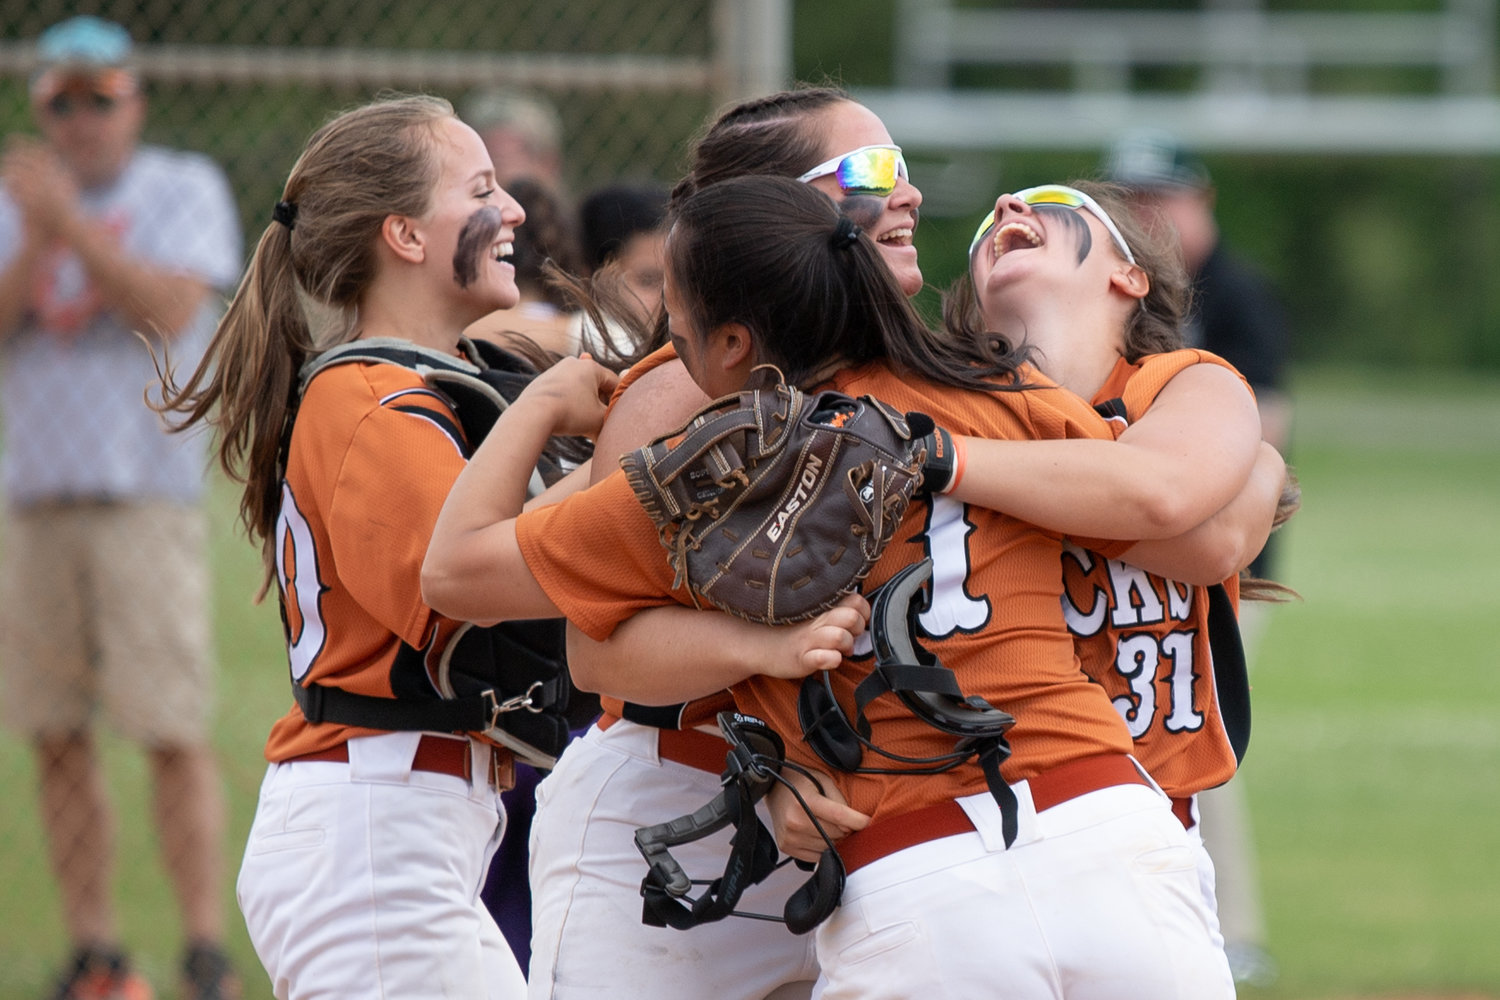 It's celebration time in East Rockaway after the Rocks took down Oyster Bay for the Nassau Class B softball championship.